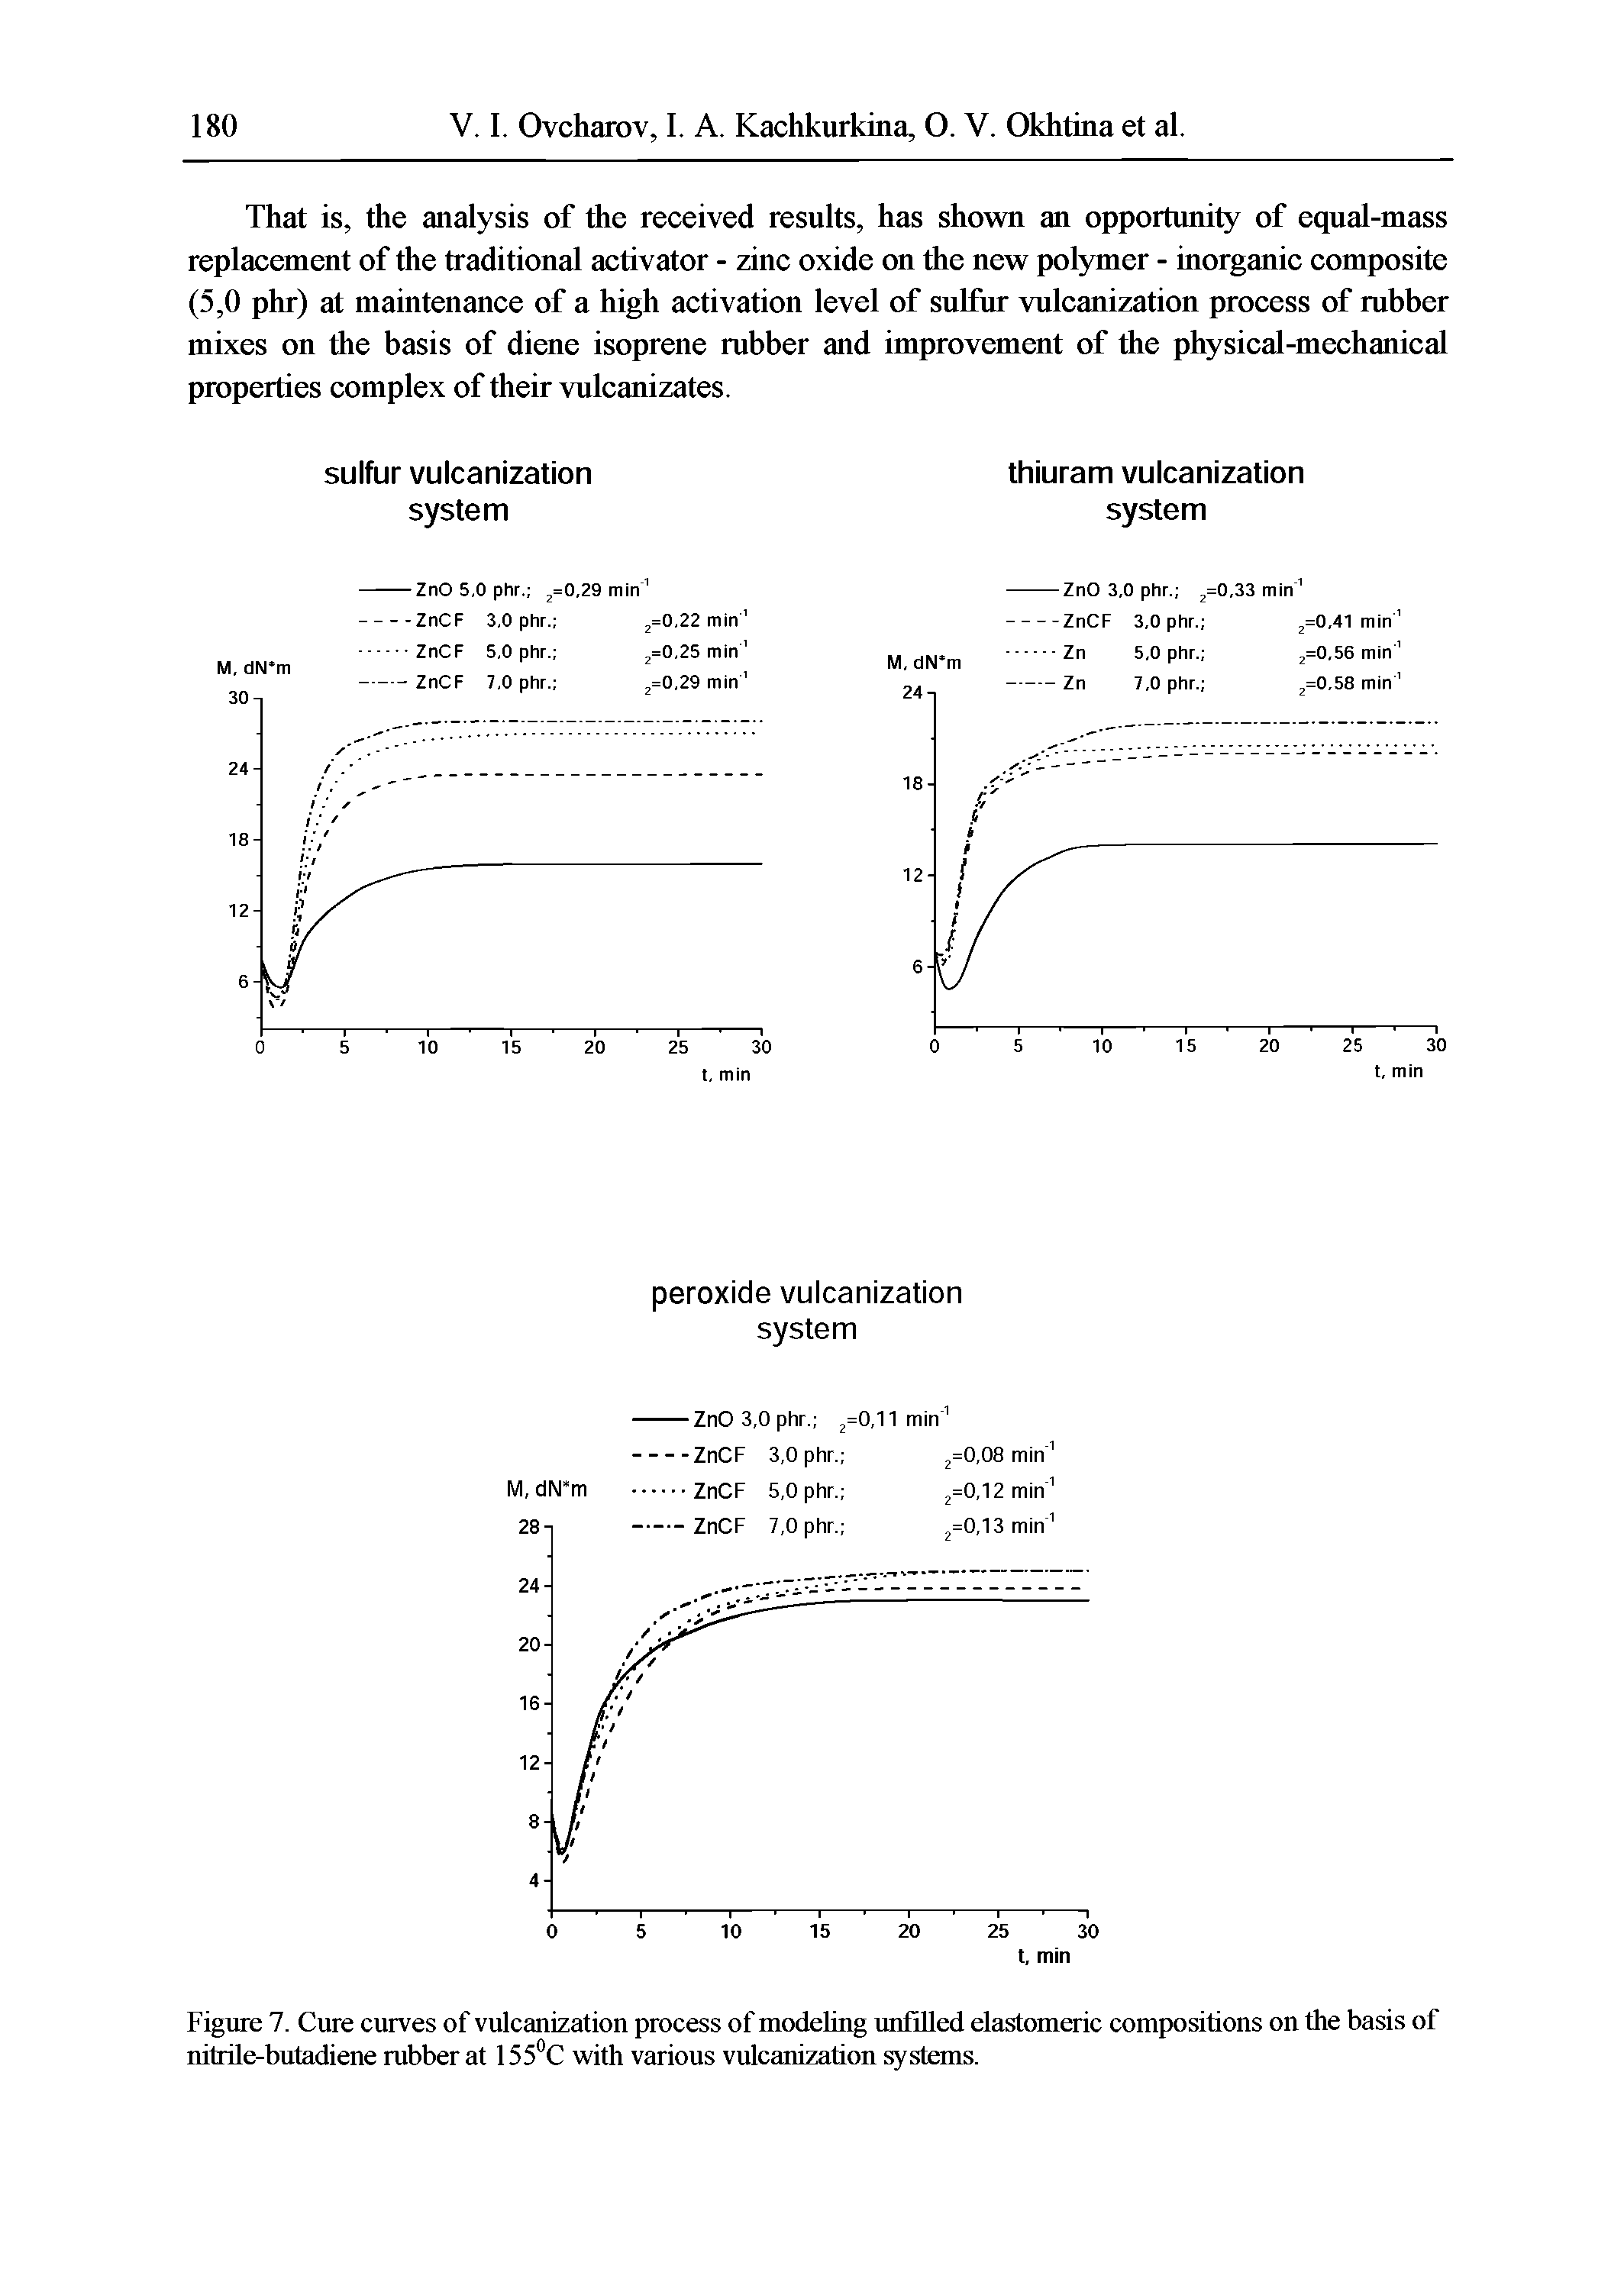 Figure 7. Cure curves of vulcanization process of modeling unfilled elastomeric compositions on the basis of nitrile-butadiene rubber at 155°C with various vulcanization systems.